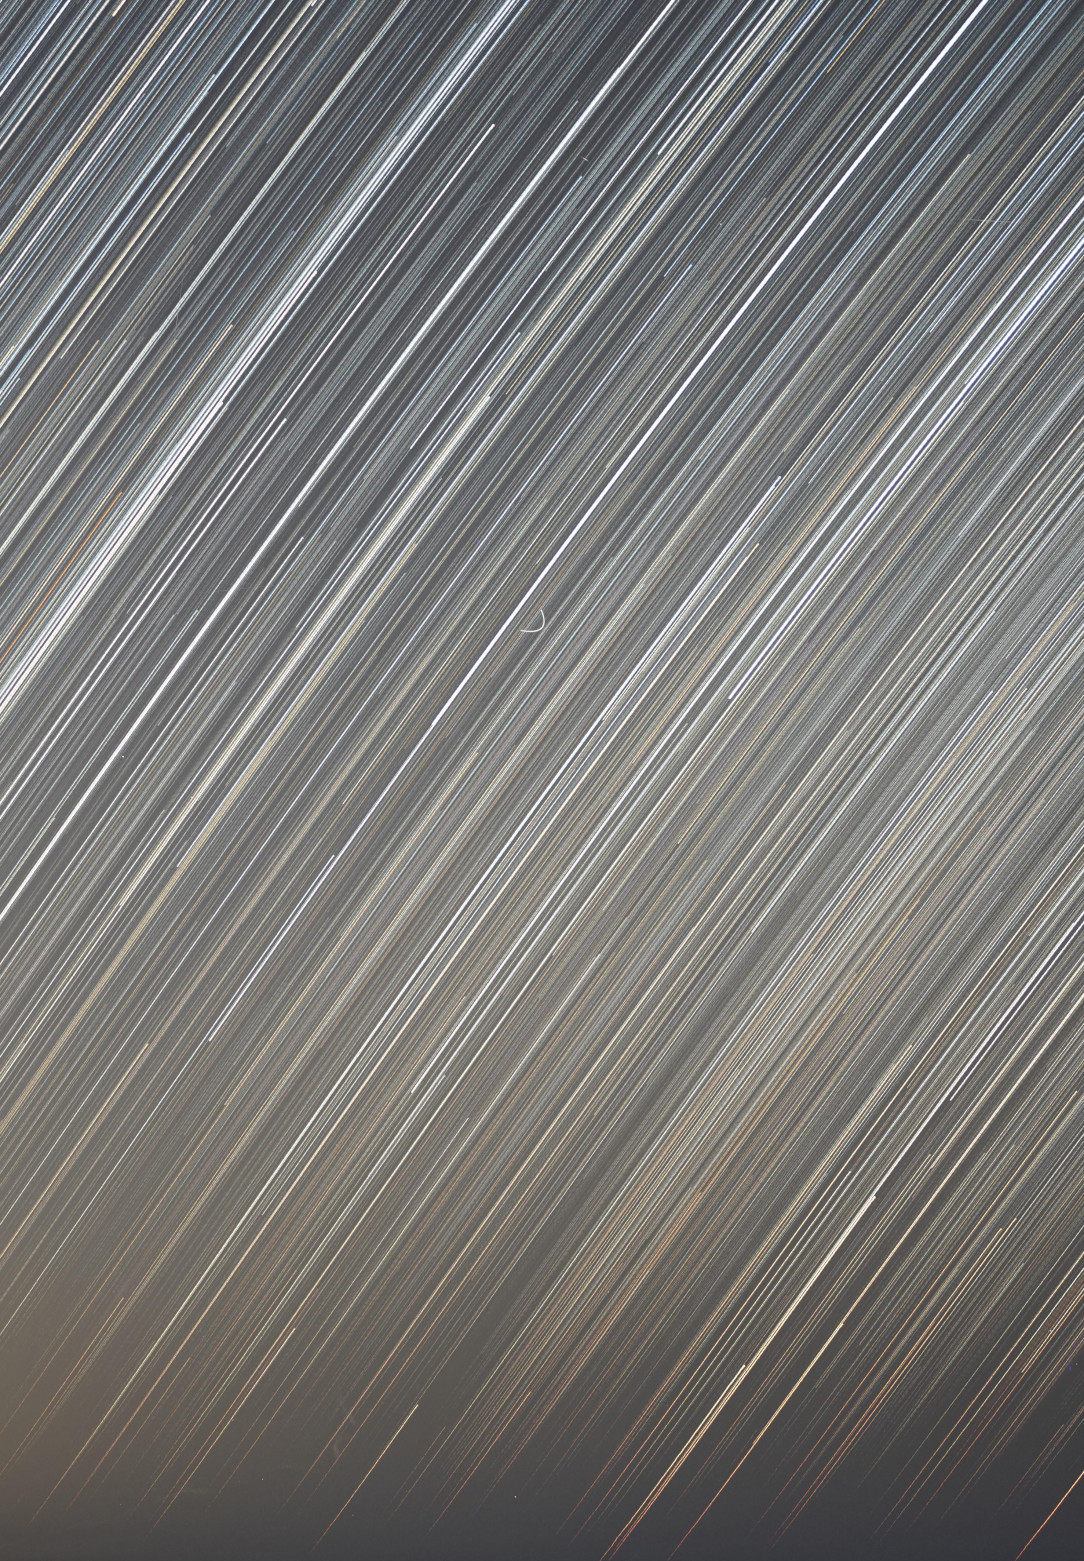 What is this thing I captured in a star trail photo shoot? More in comments